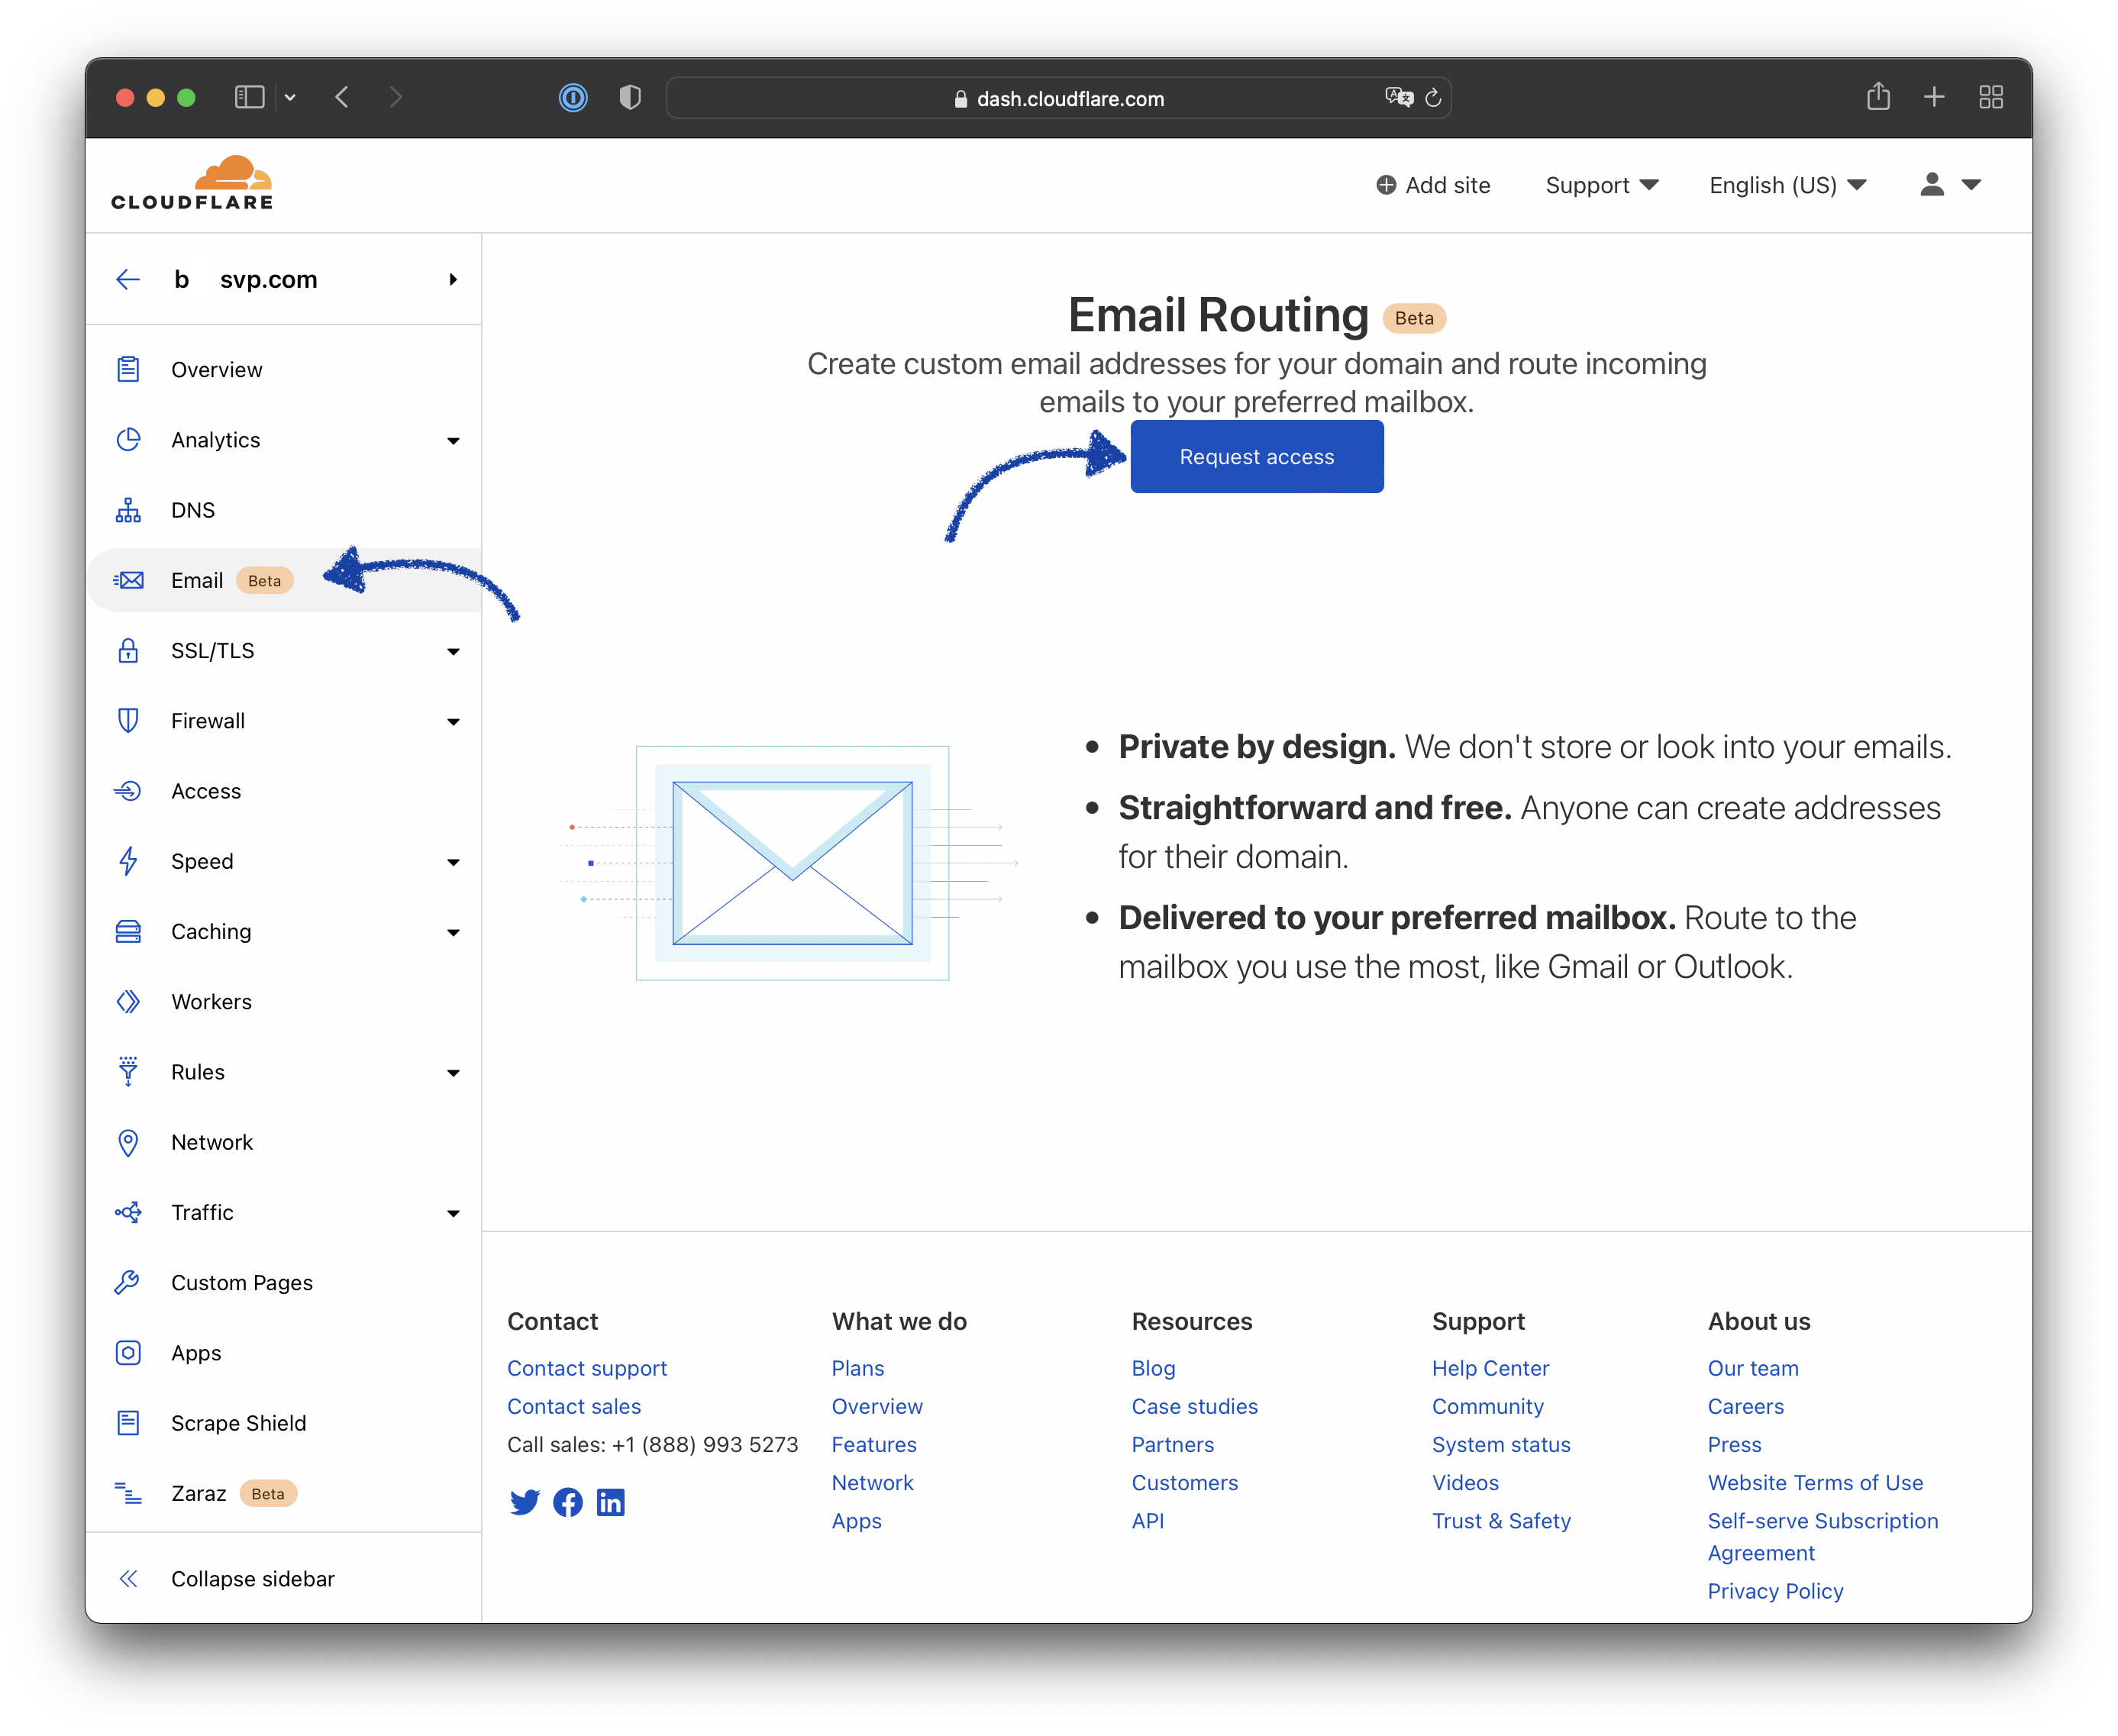 An instruction of request access to Cloudflare Email Routing service.